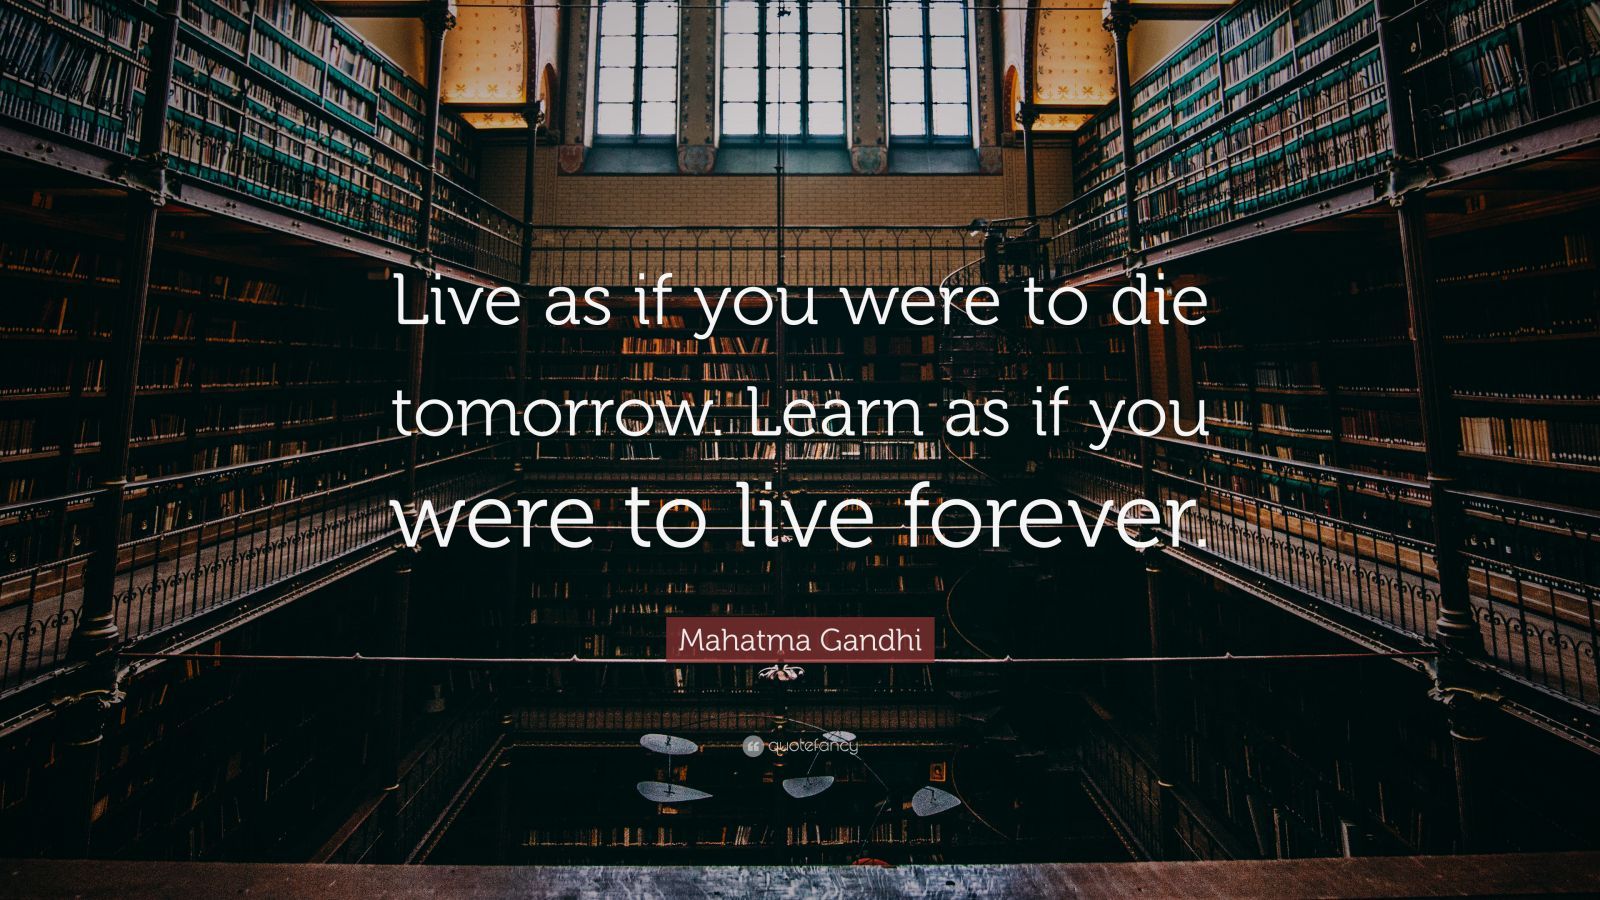 Mahatma Gandhi Quote: “Live as if you were to die tomorrow. Learn as if you were to live forever.” (26 wallpaper)